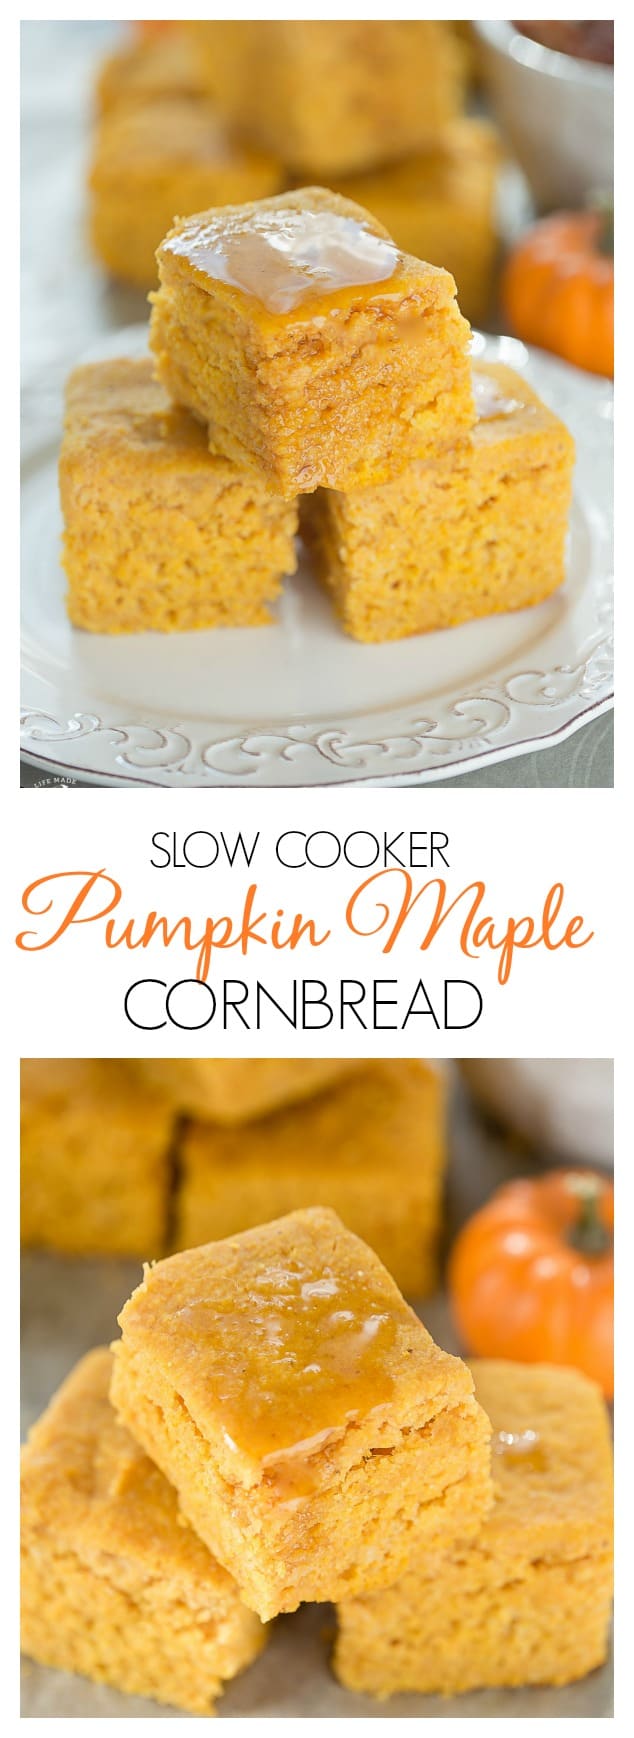 Slow Cooker Pumpkin Cornbread is easy to make & perfect with chili or soup!